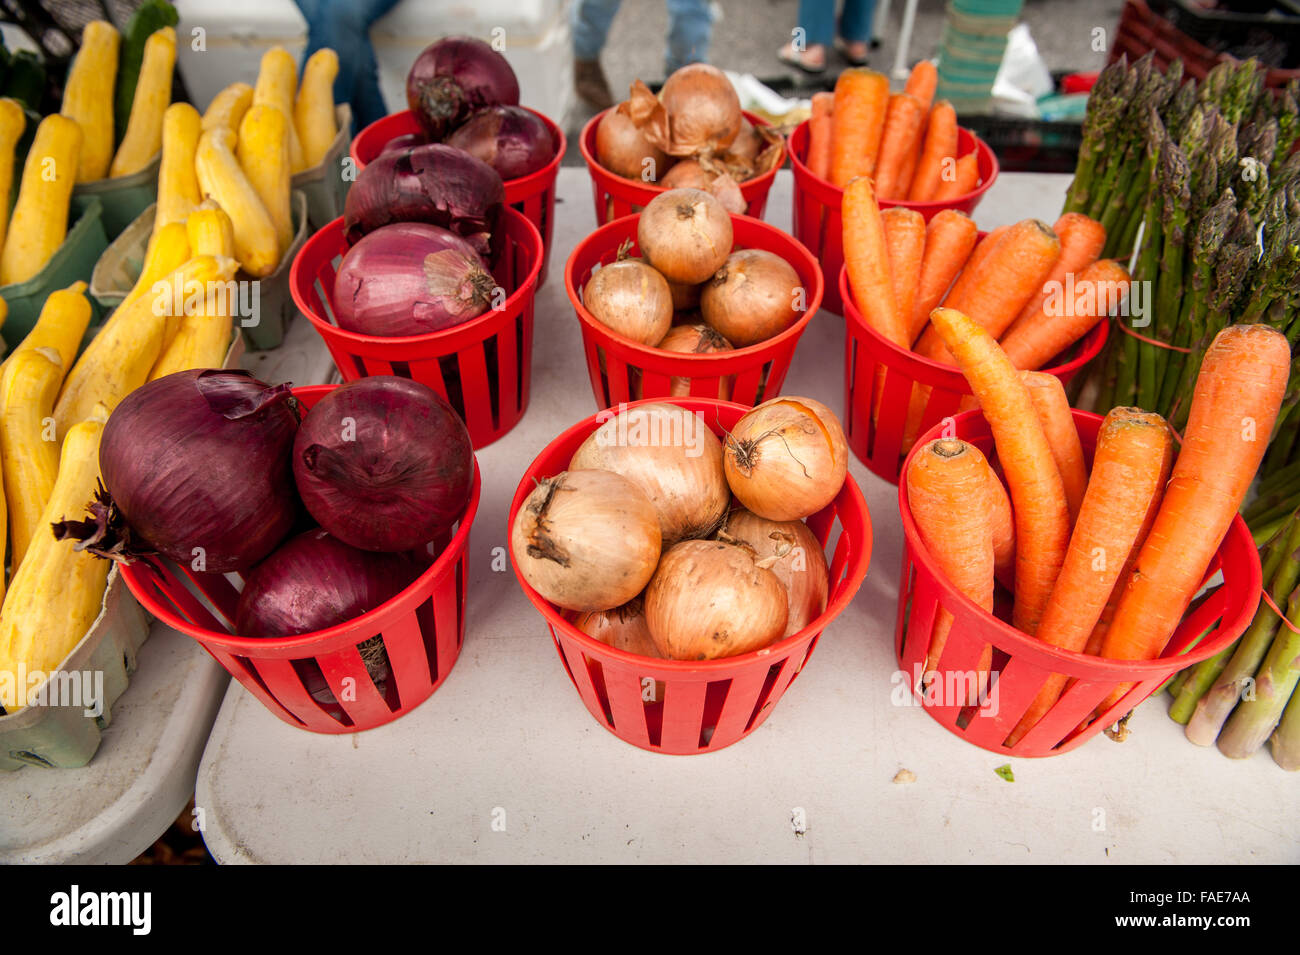 Fresh produce for sale at a farmers market Stock Photo